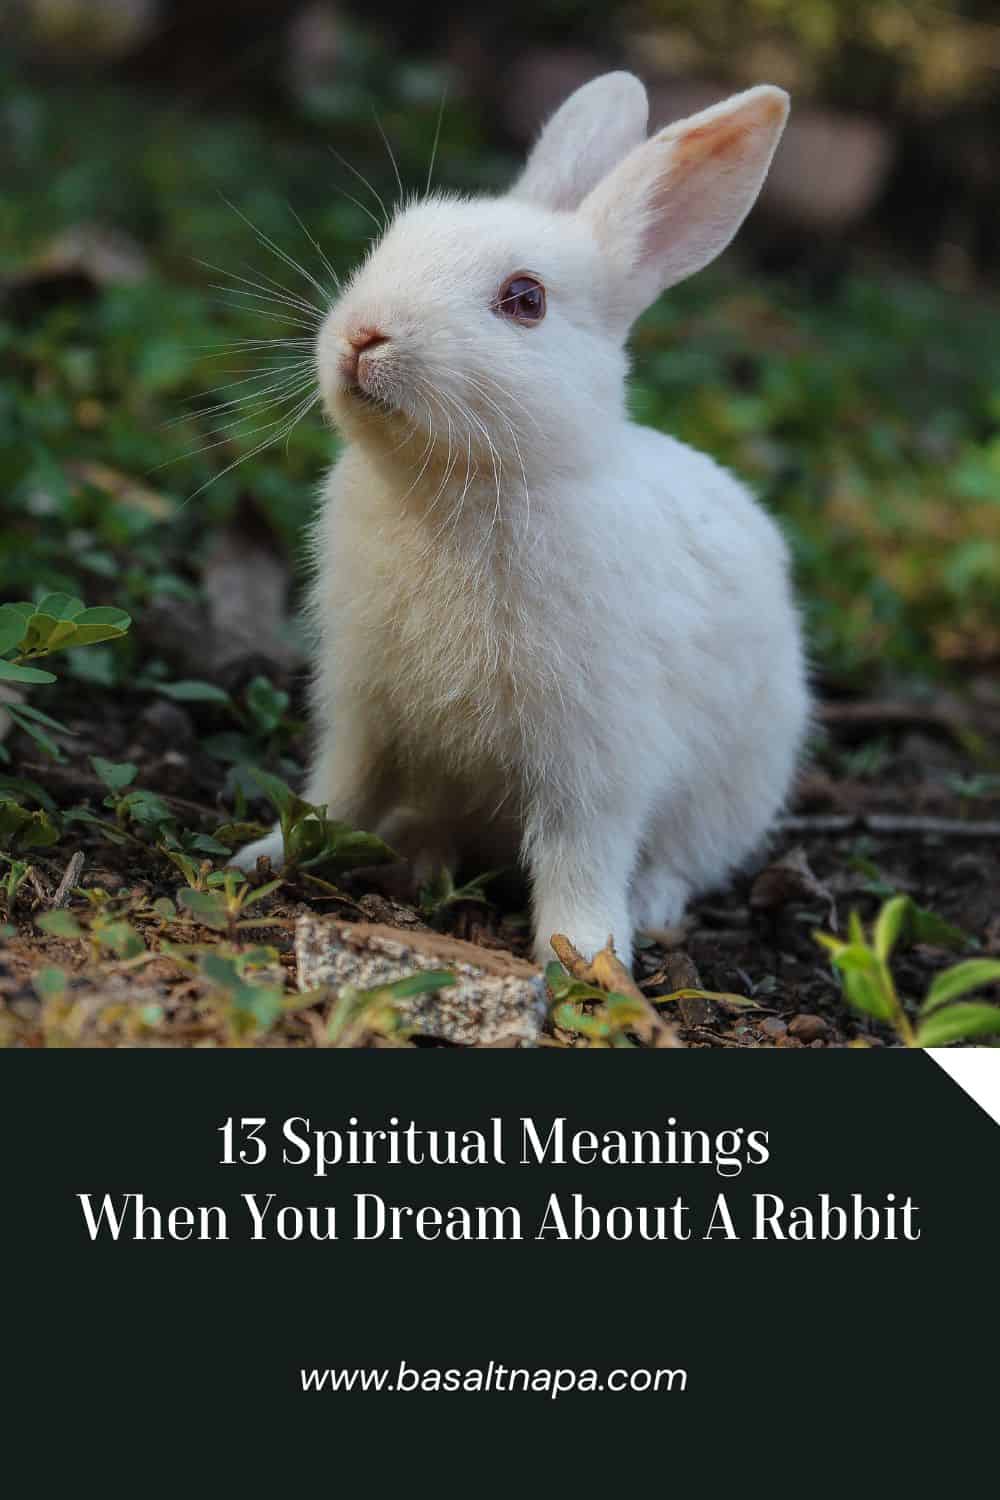 13 Spiritual Meanings When You Dream About A Rabbit